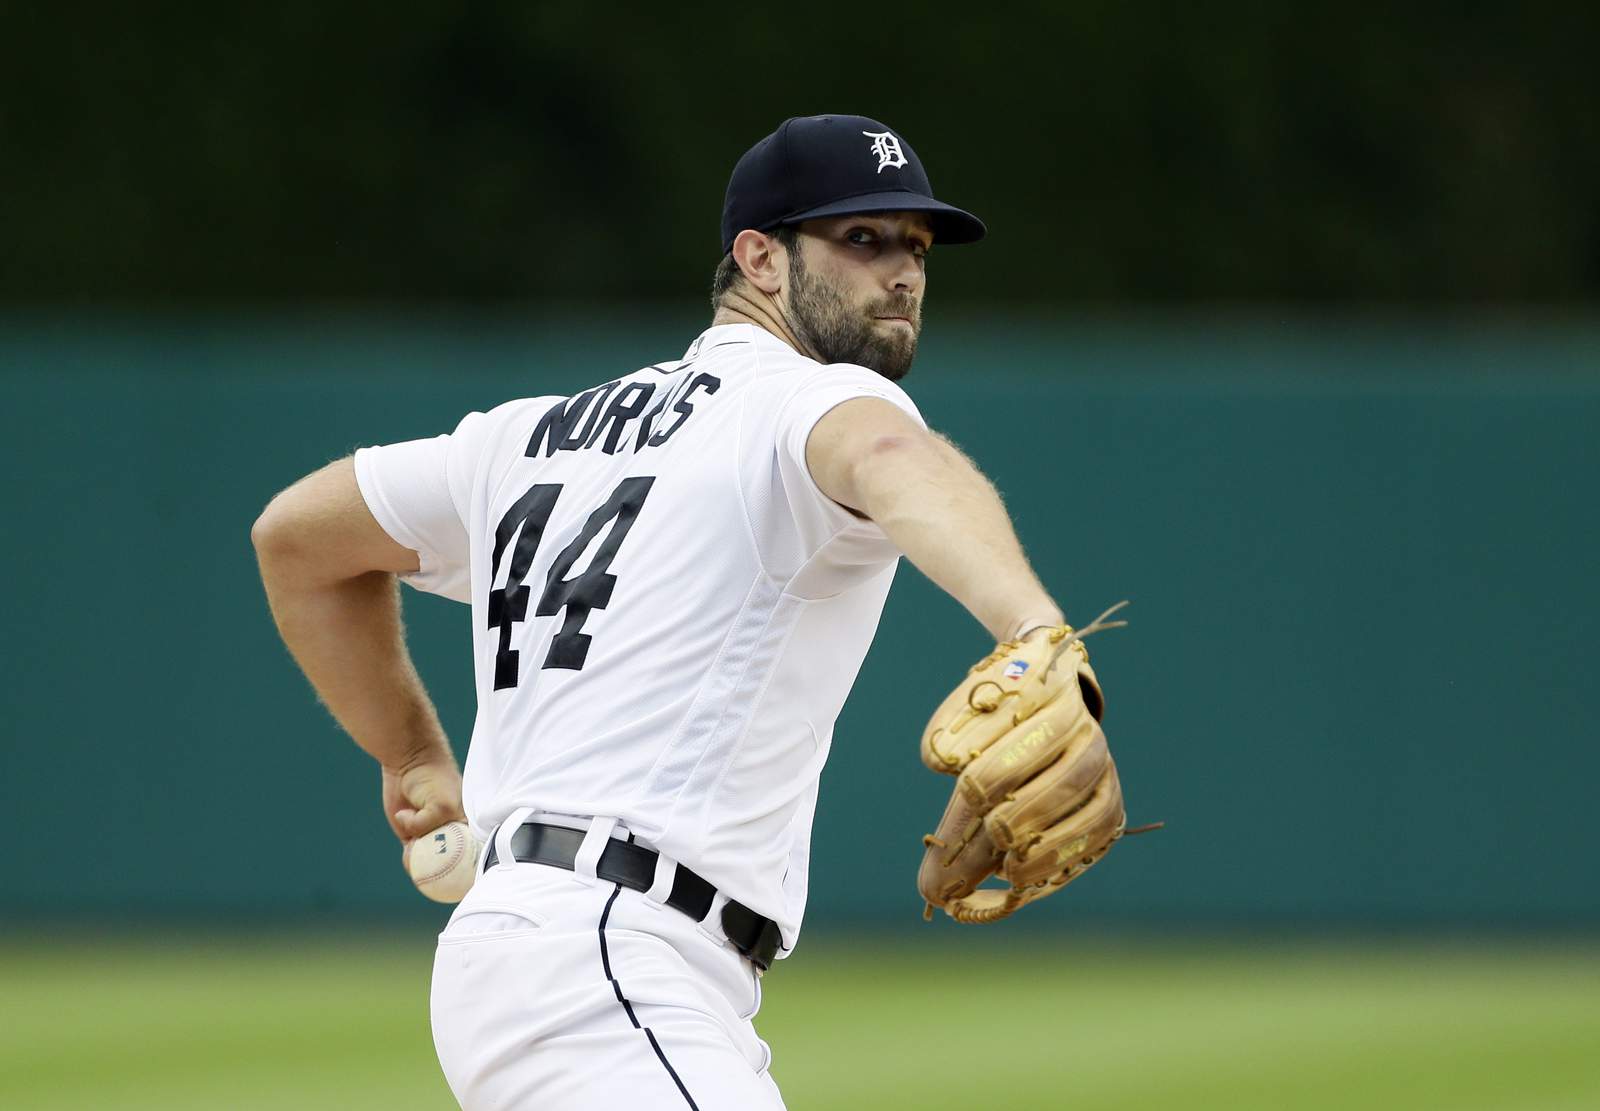 Daniel Norris cleared to rejoin Detroit Tigers after positive COVID-19 test